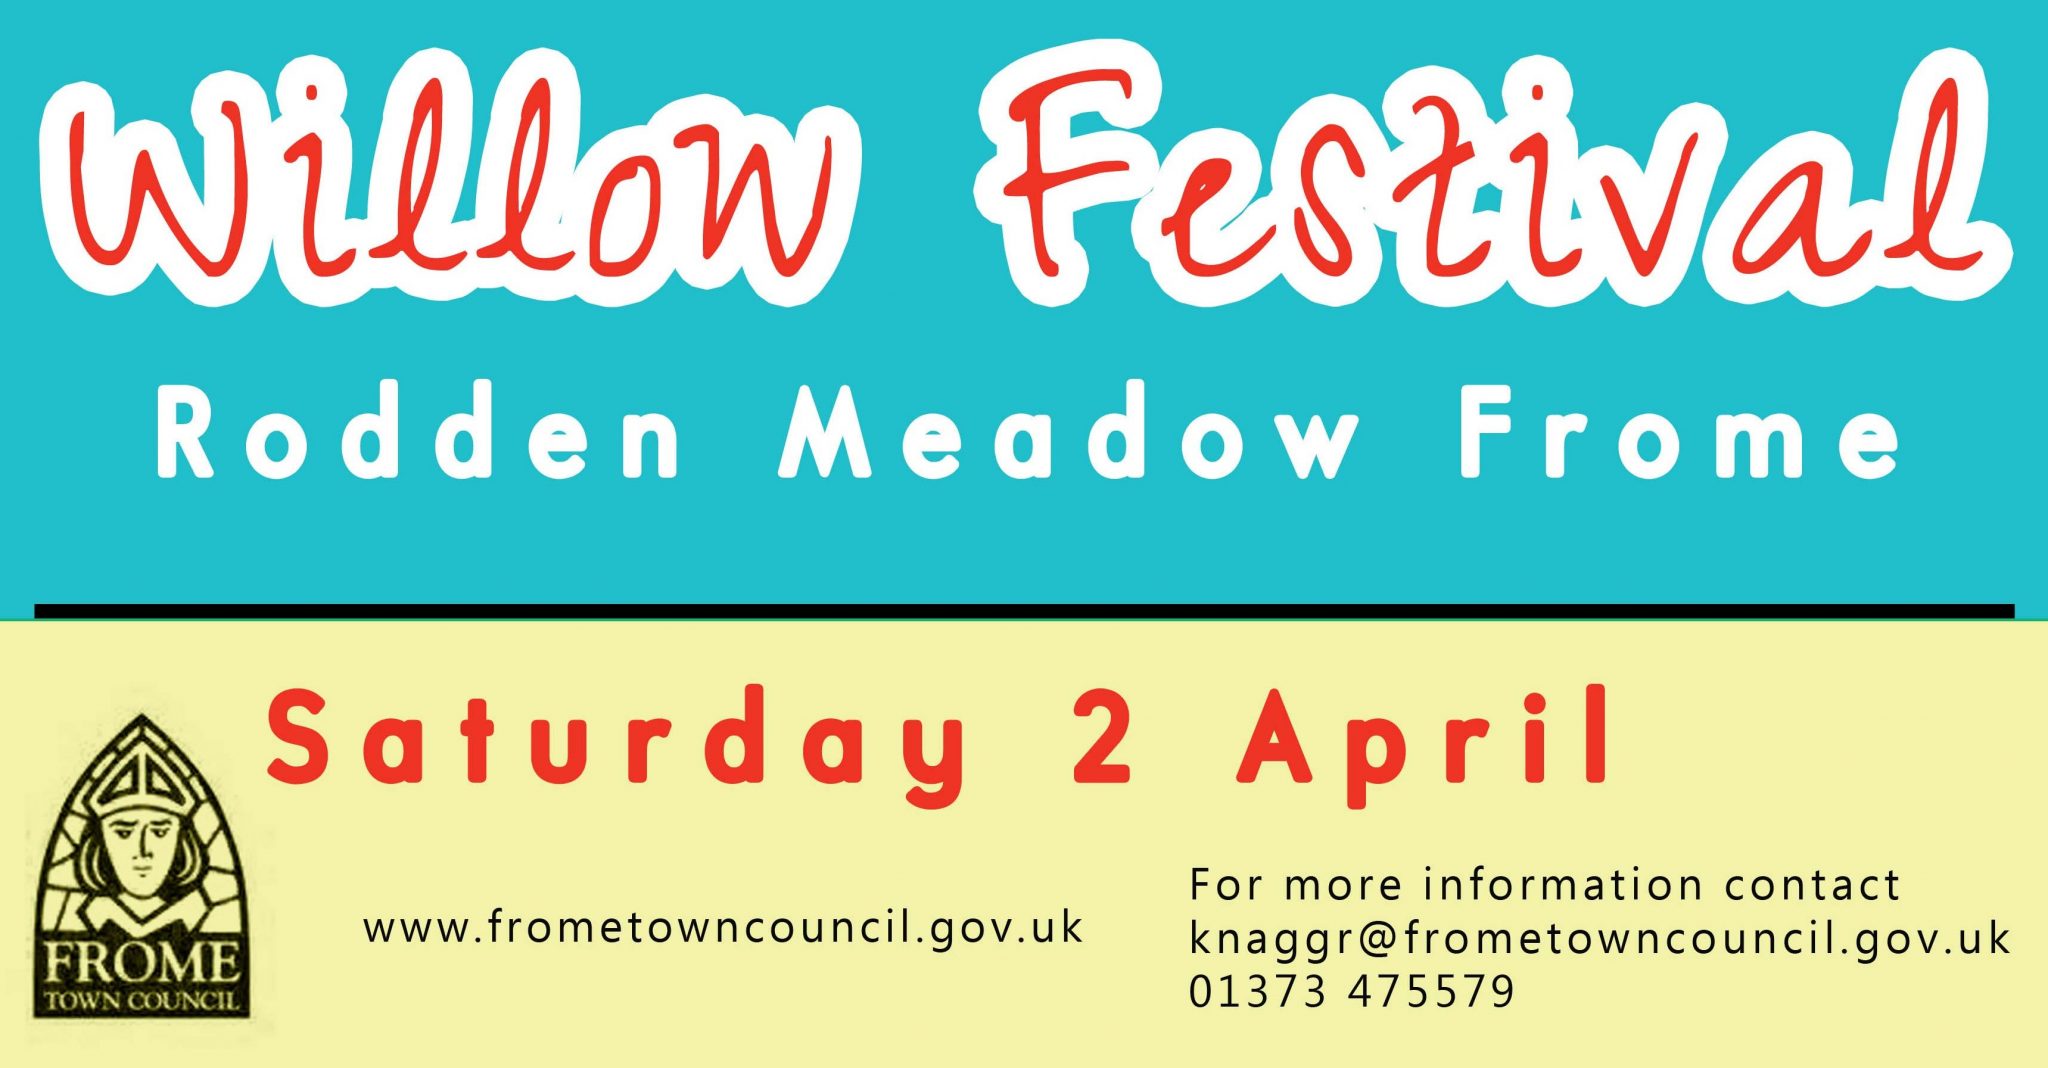 Willow Festival at Rodden Meadow Saturday 2 April Frome Town Council